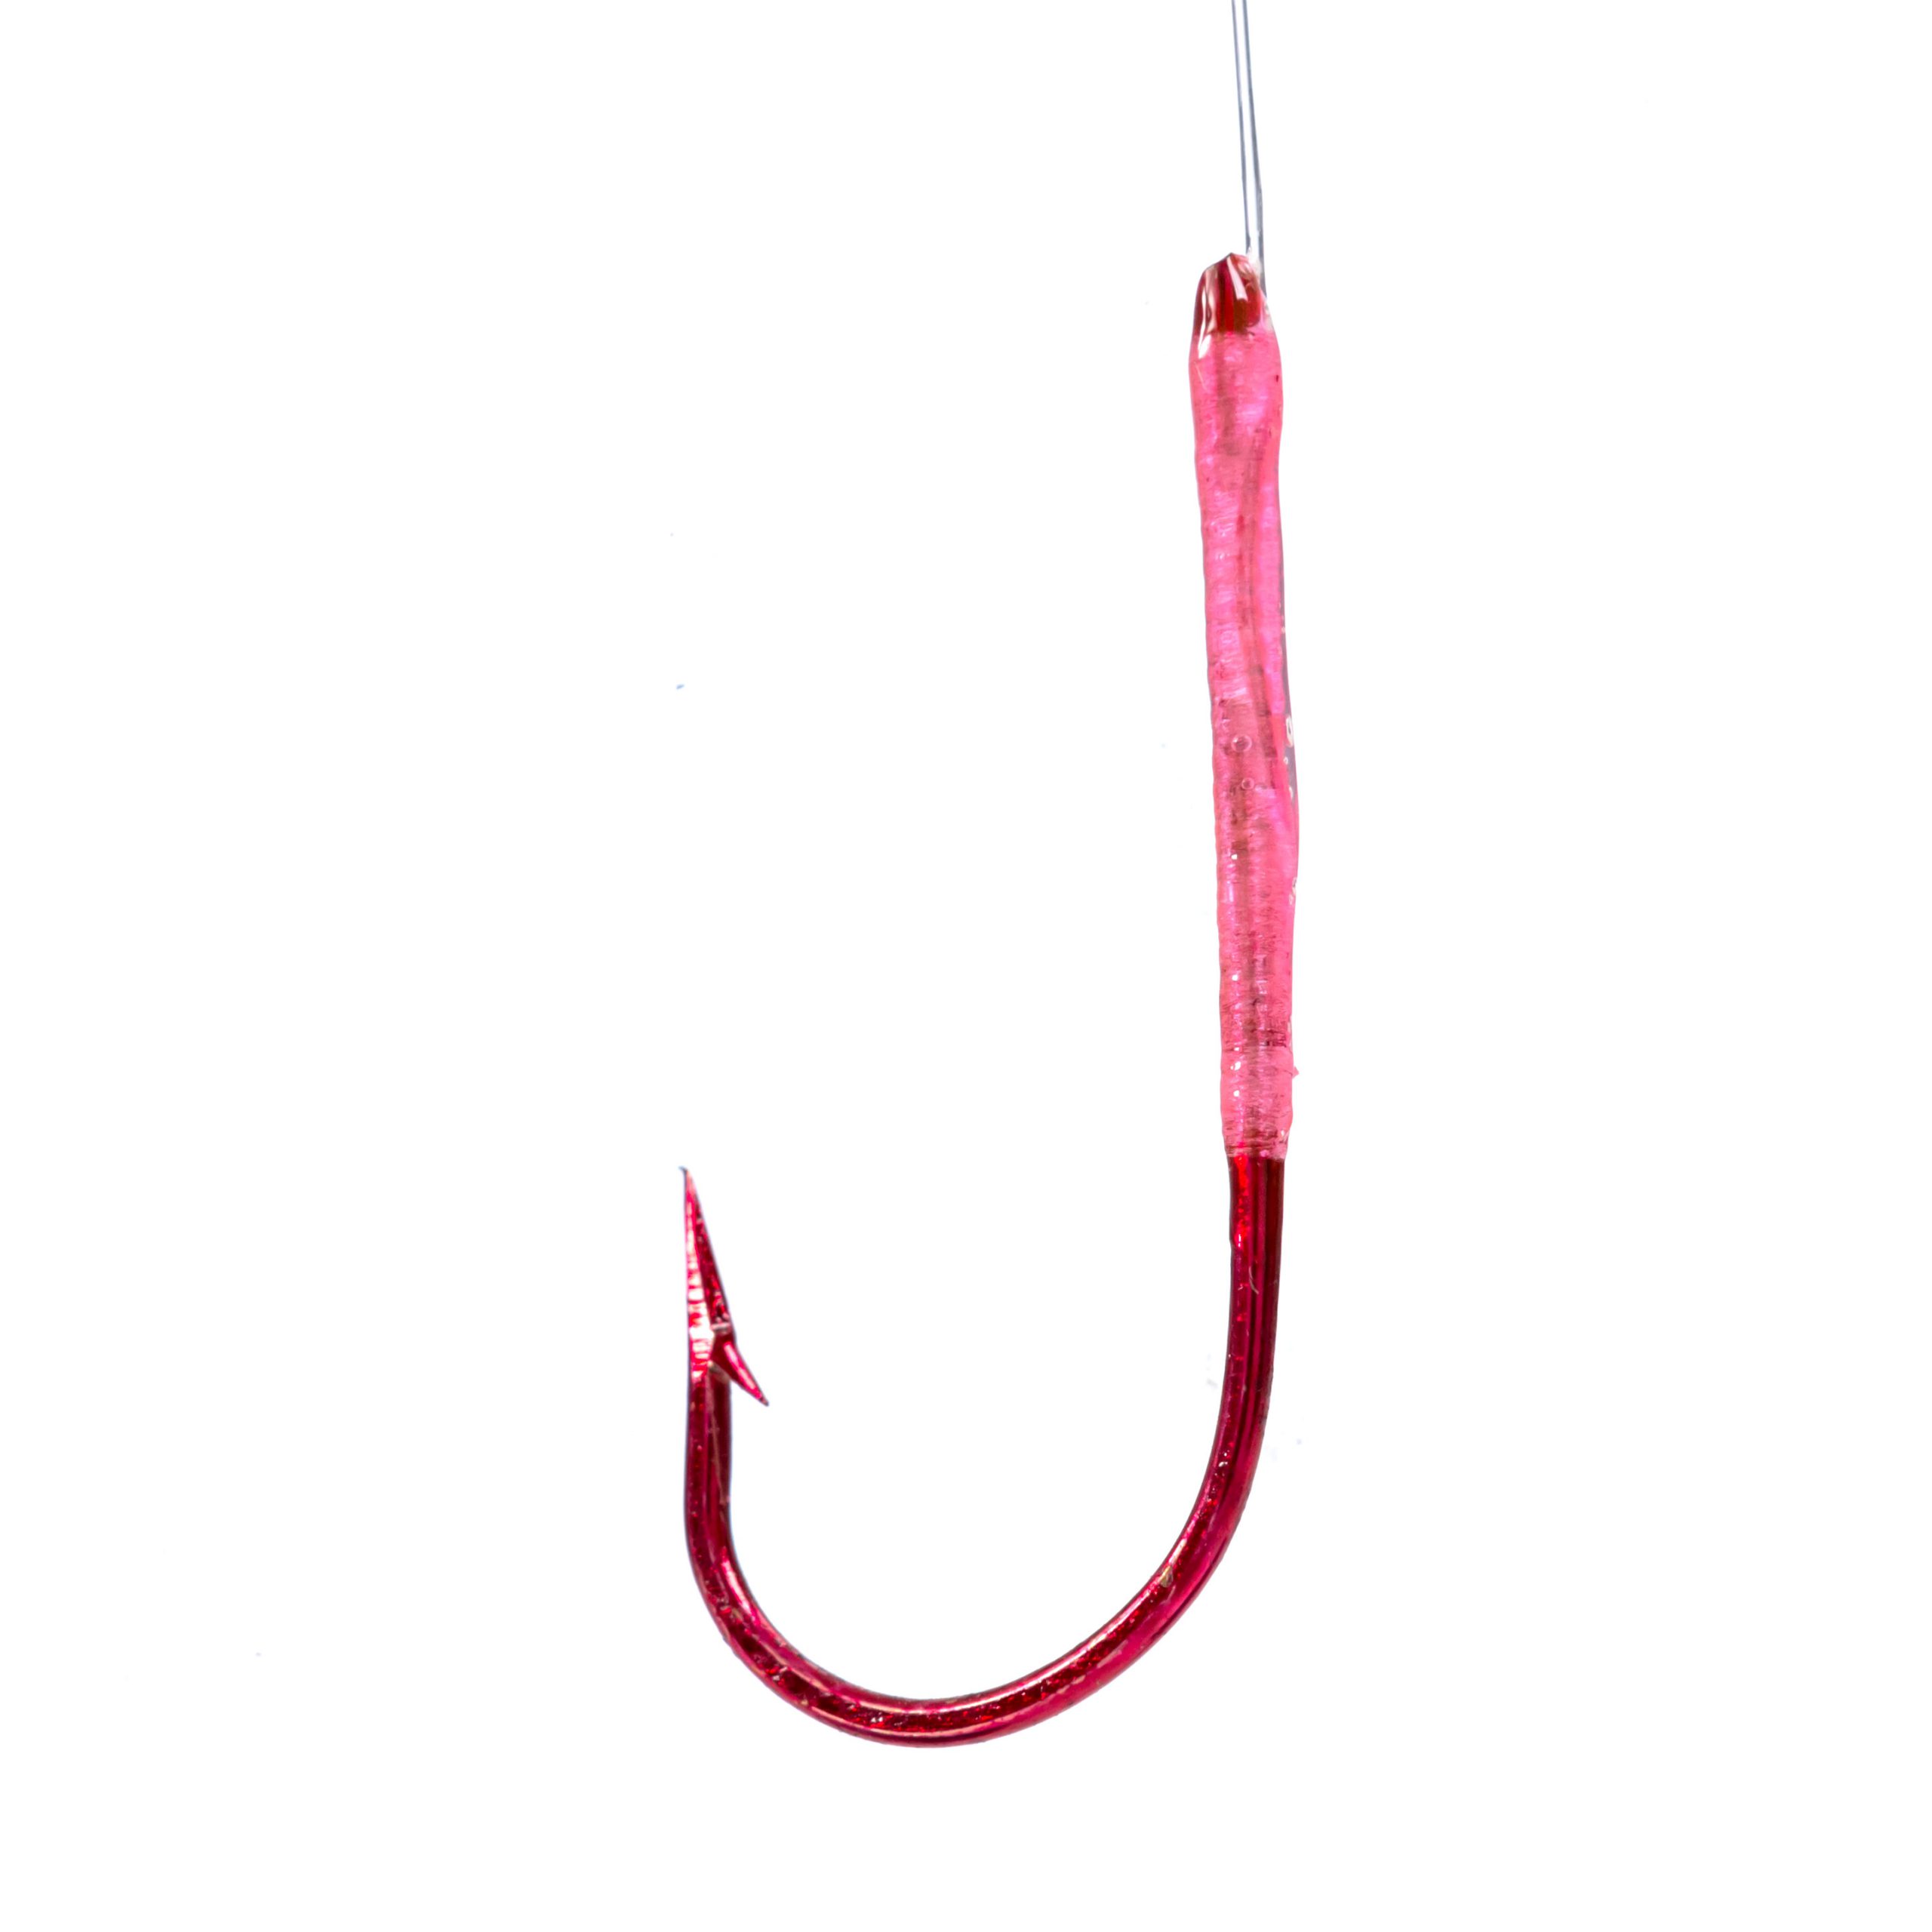 https://www.maineproseries.com/wp-content/uploads/2020/01/sewing-bait-hook-leader-pink-lady-scaled.jpg